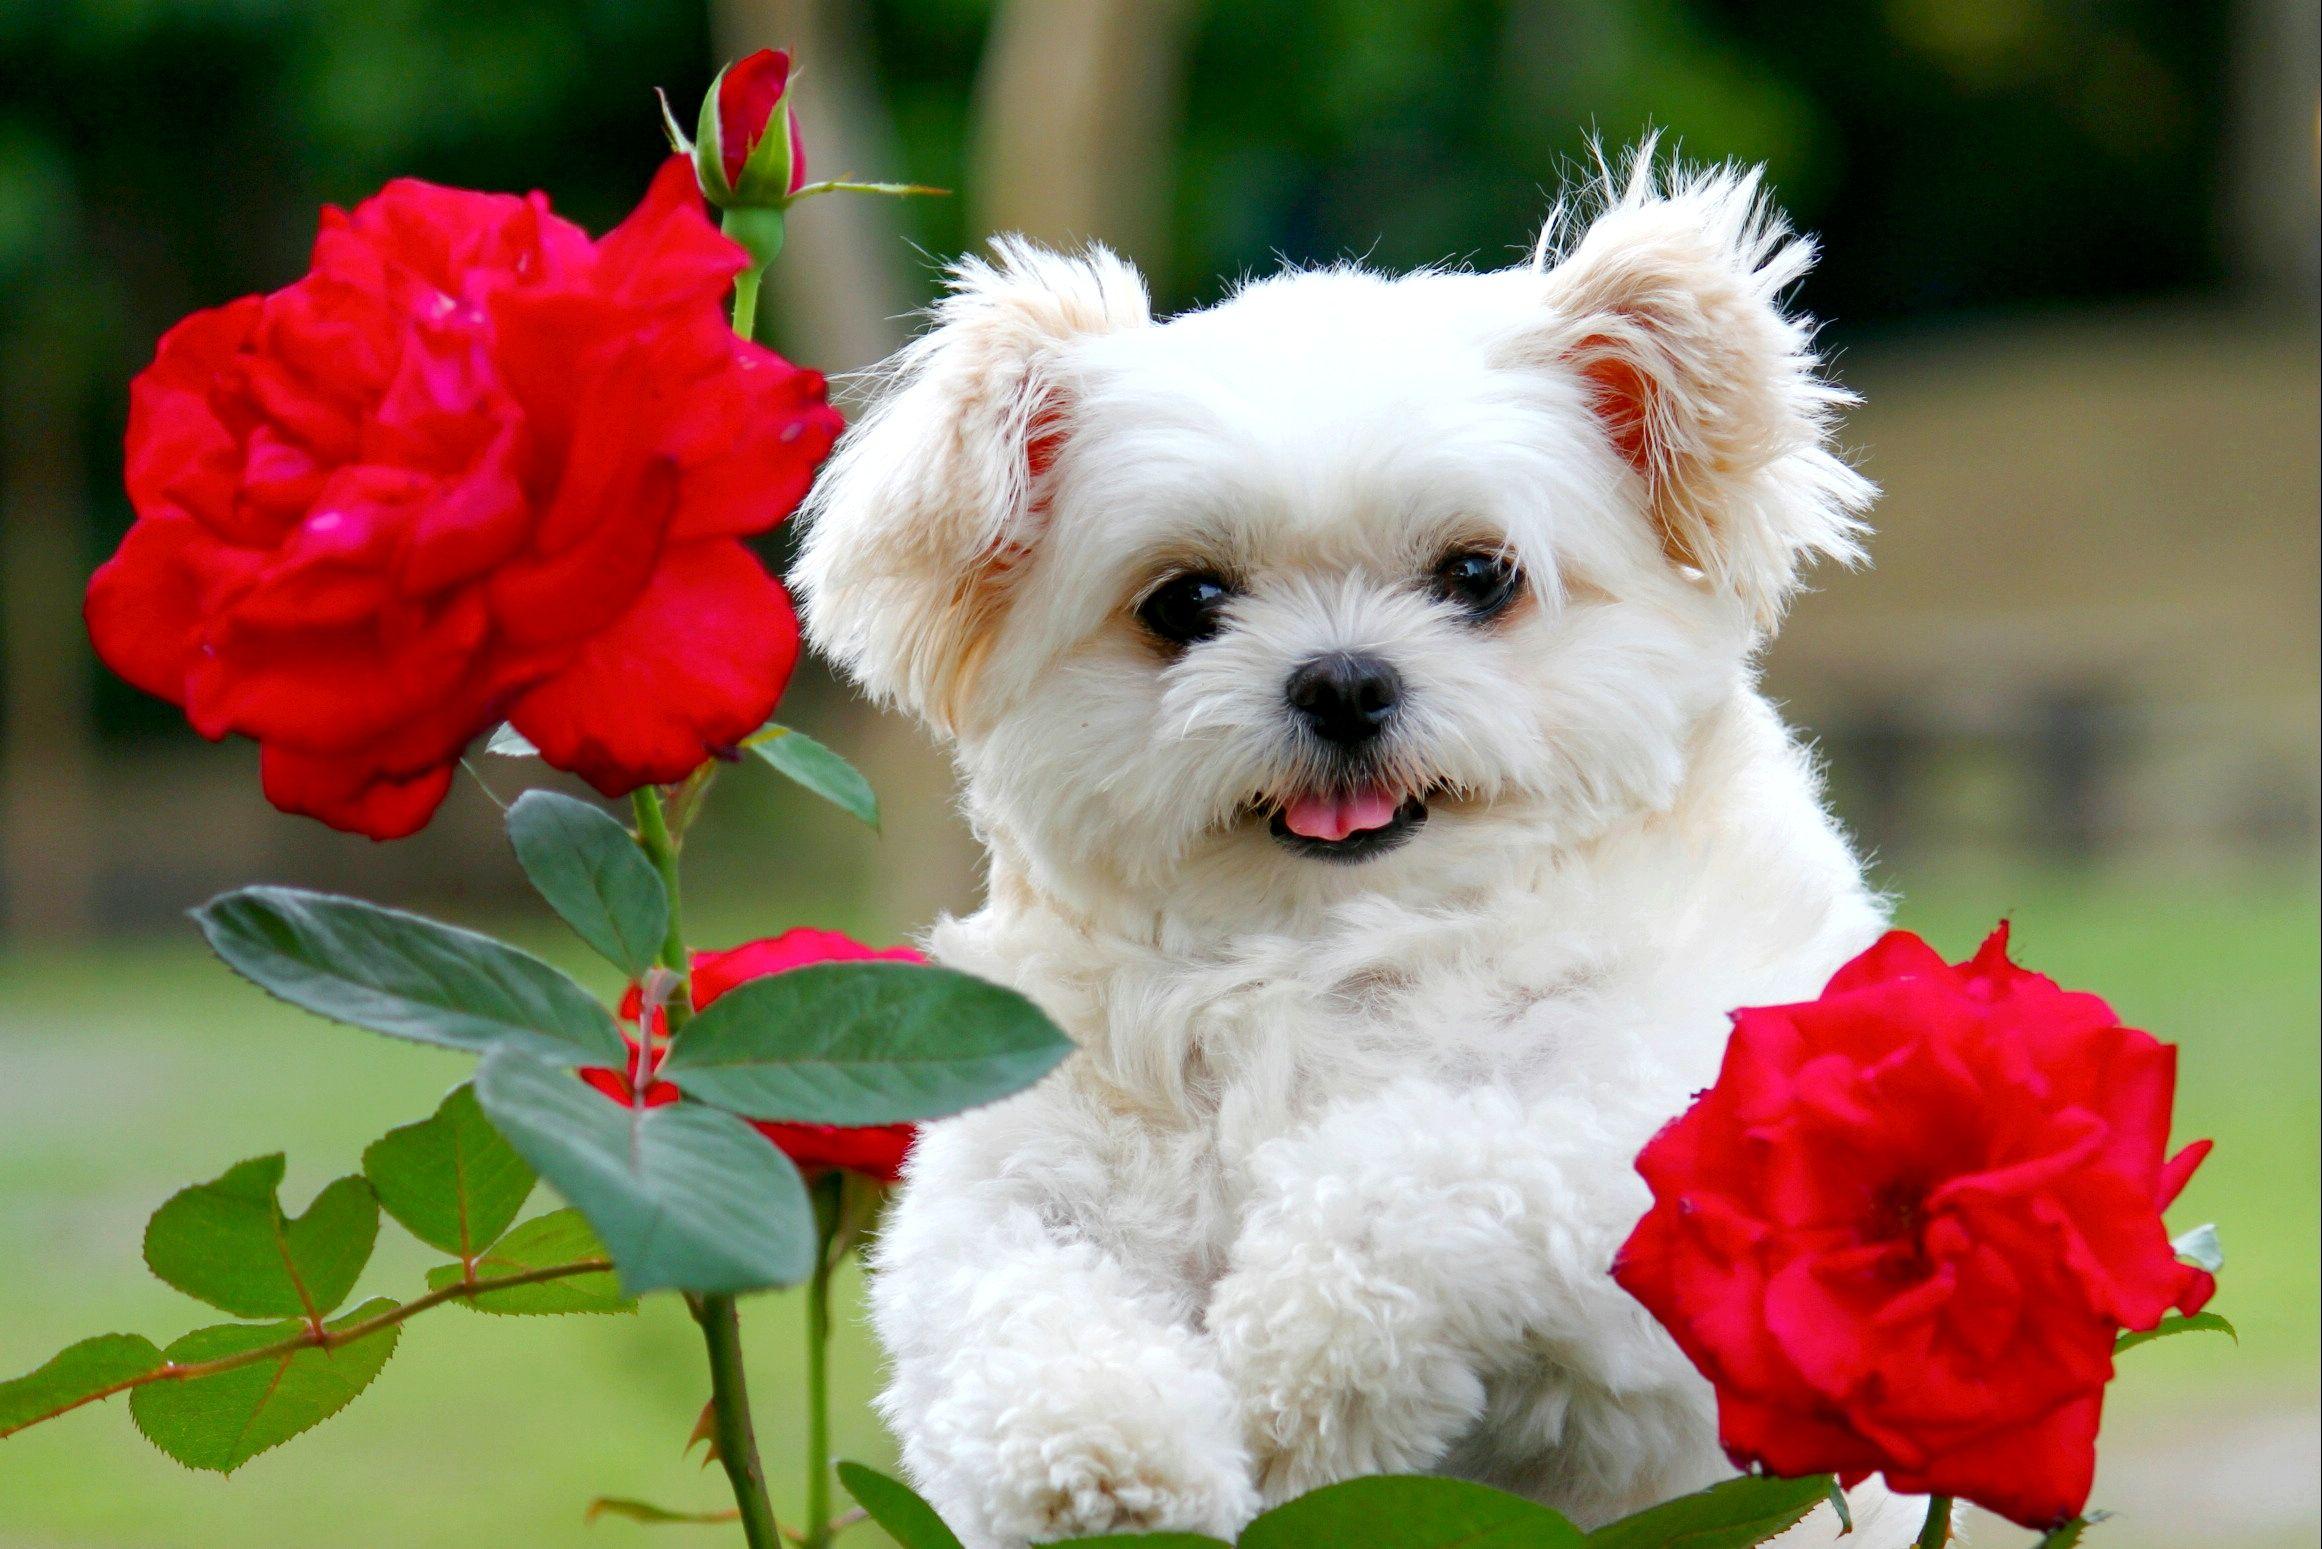 Flowers. Cute puppy wallpaper, Cute fluffy puppies, Cute white puppies